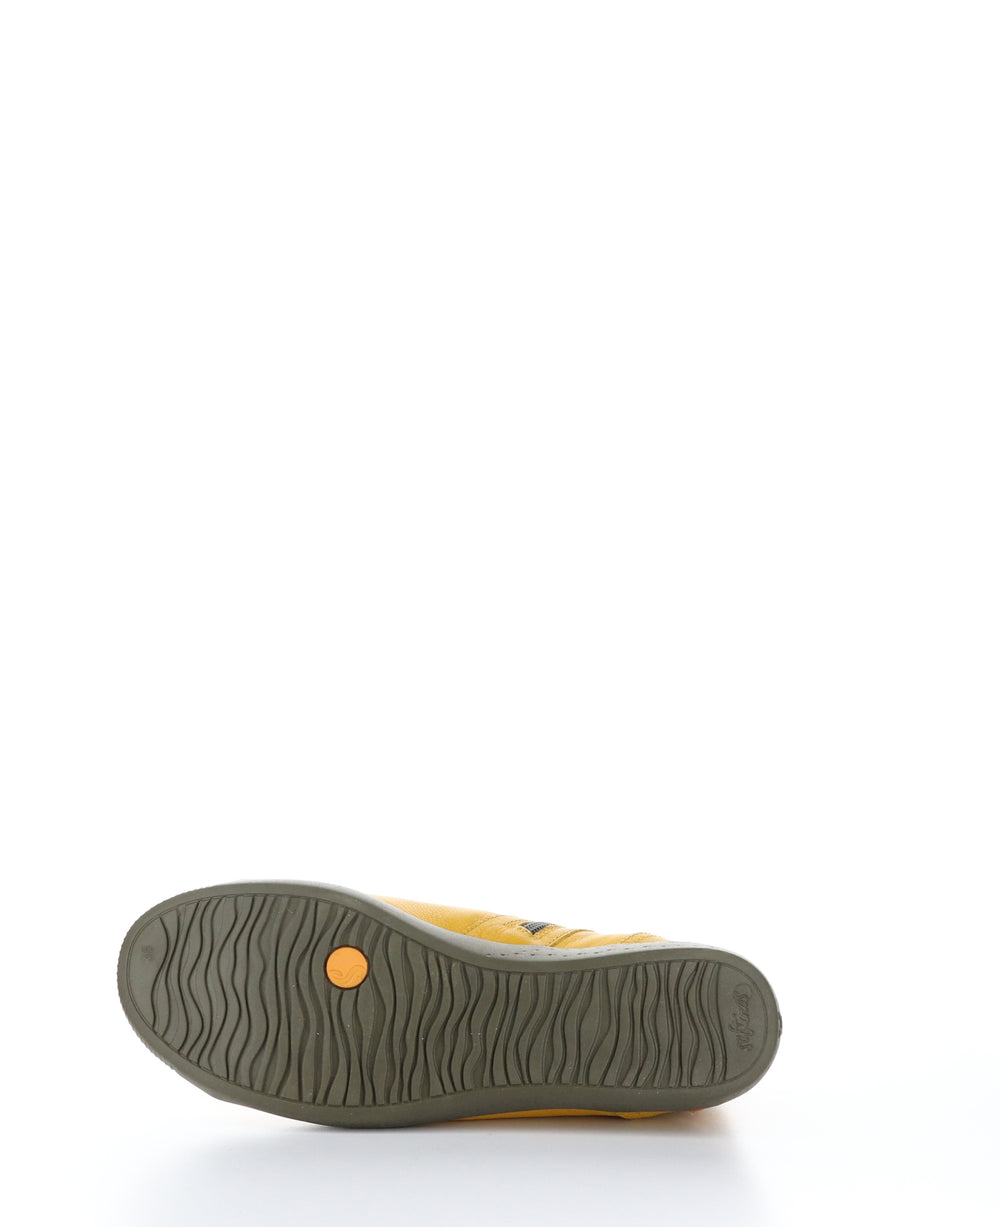 IBBI653SOF Ochre Round Toe Shoes|IBBI653SOF Chaussures à Bout Rond in Jaune